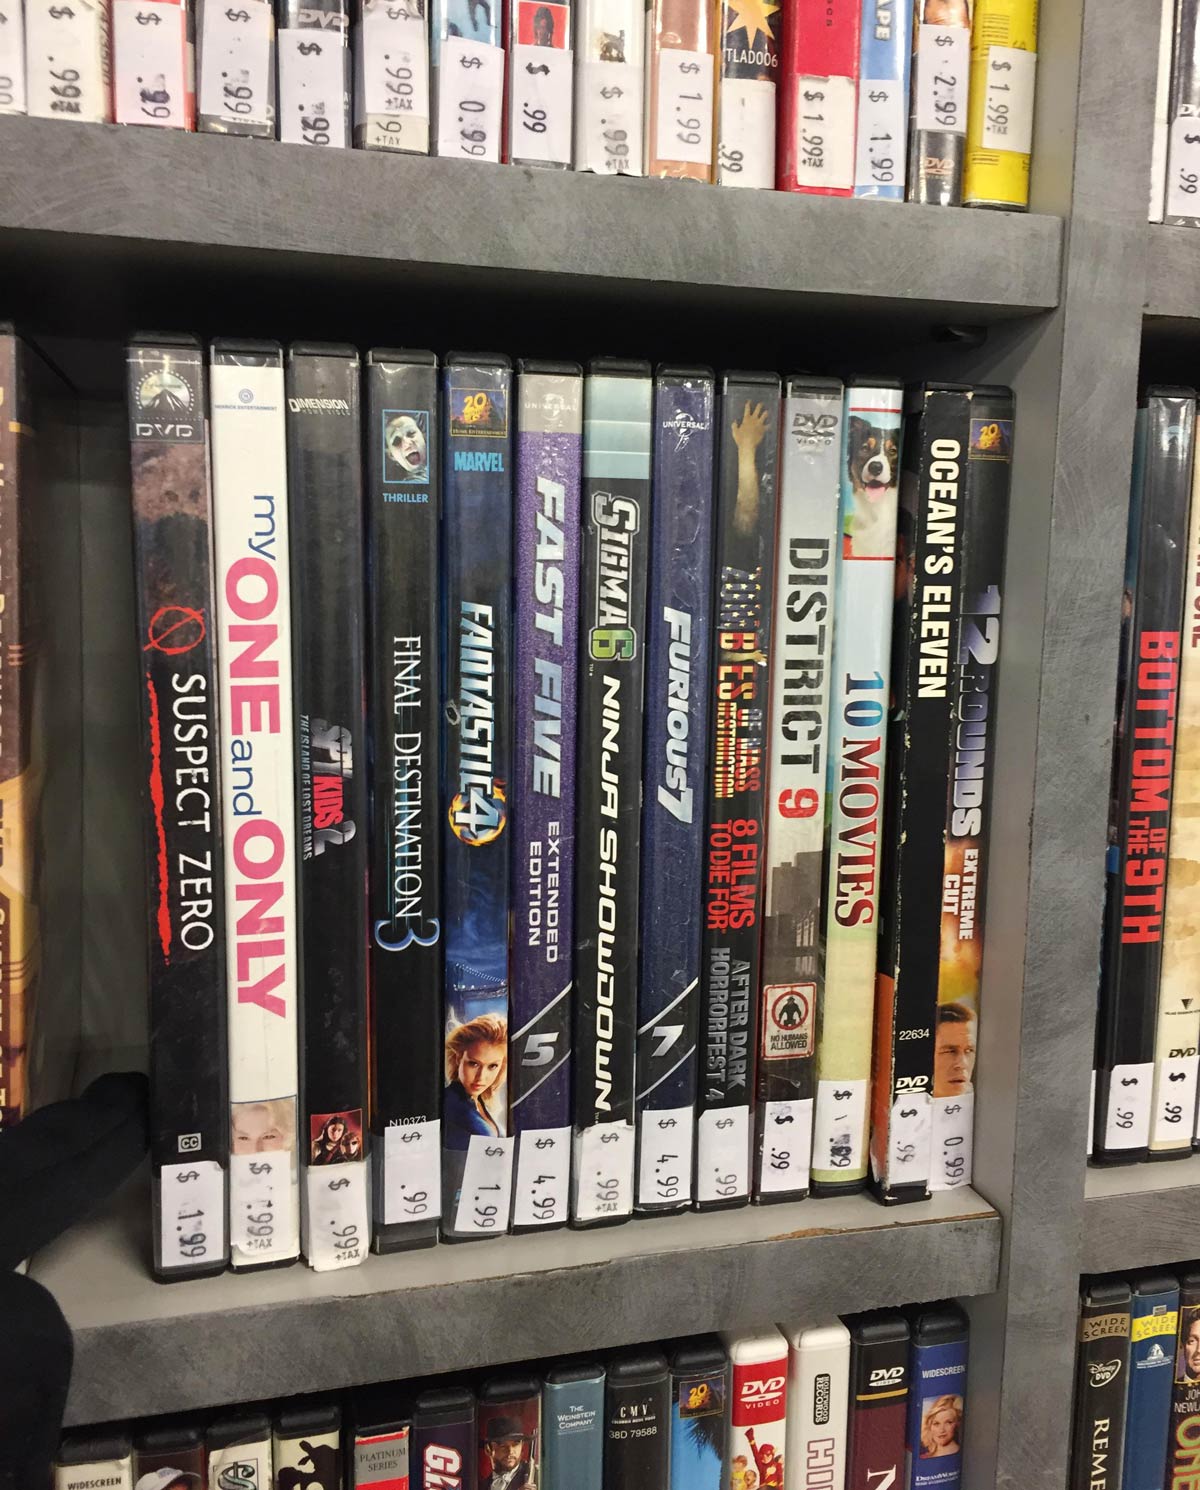 Somebody at the pawn shop was having fun organizing the movies here